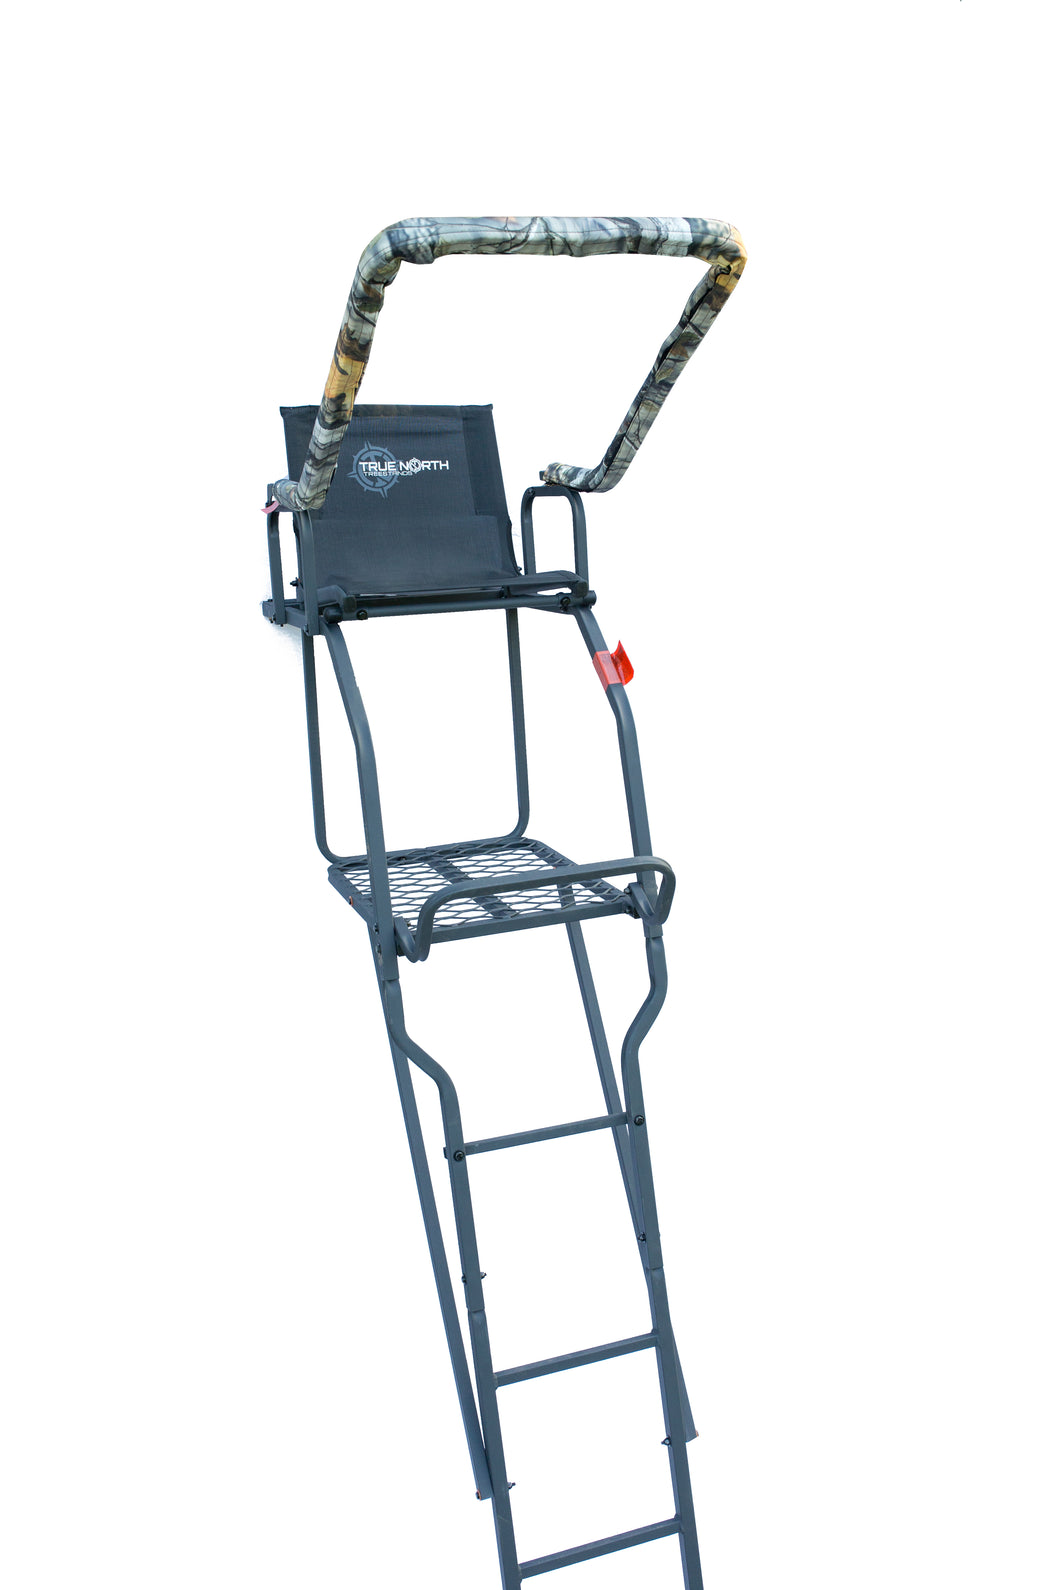 REIGN SC LADDER STAND (SCRATCH AND BLEMISH/FINAL BLOW-OUT PRICE)